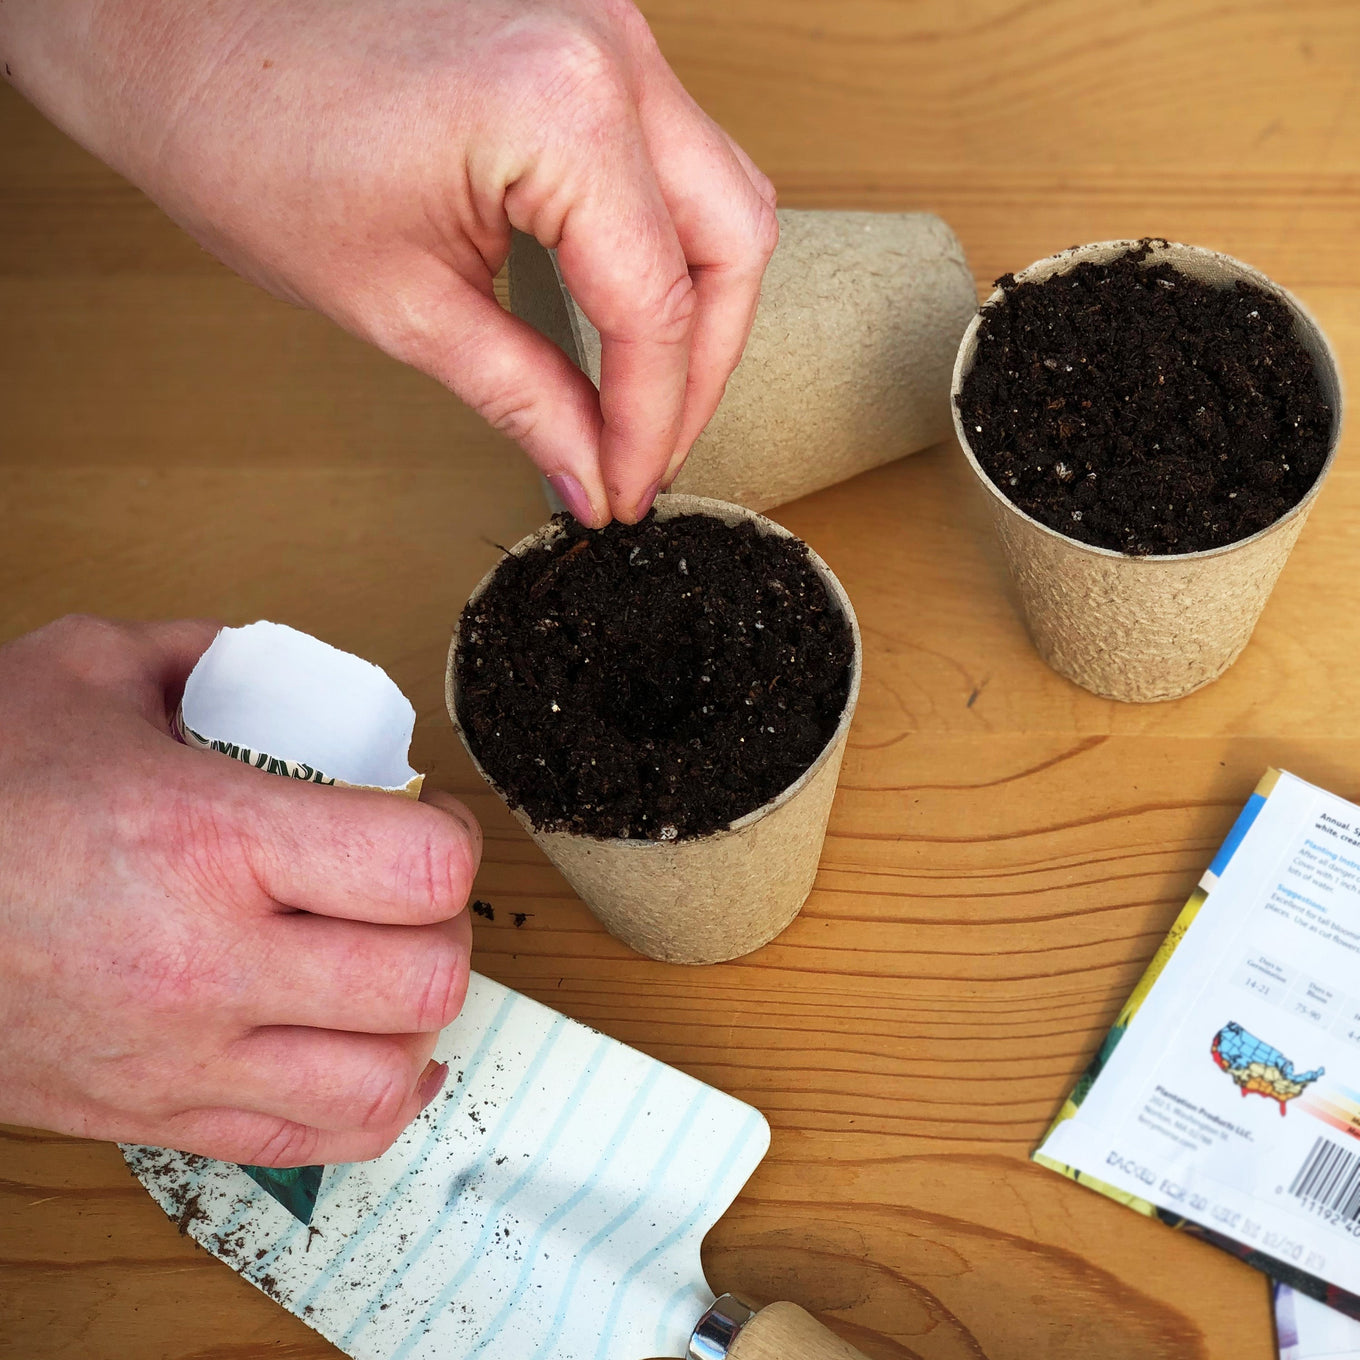 Planting Dwarf Blue Curled Kale Seeds into Jiffy biodegradable peat pots for seed starting indoors.